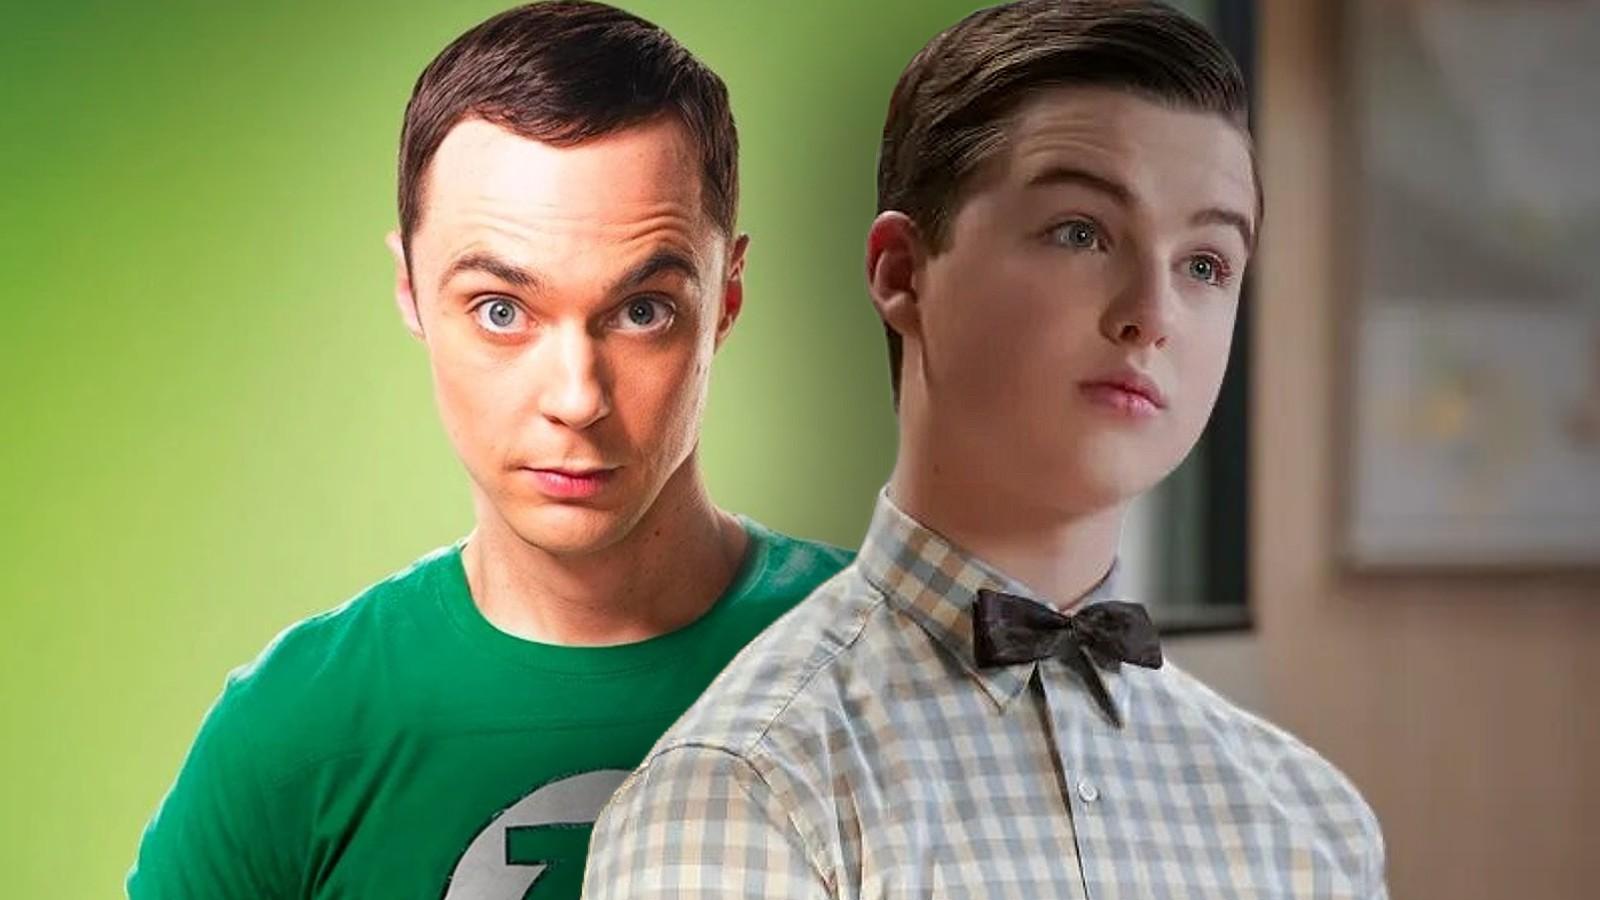 Sheldon Cooper in The Big Bang Theory and Young Sheldon